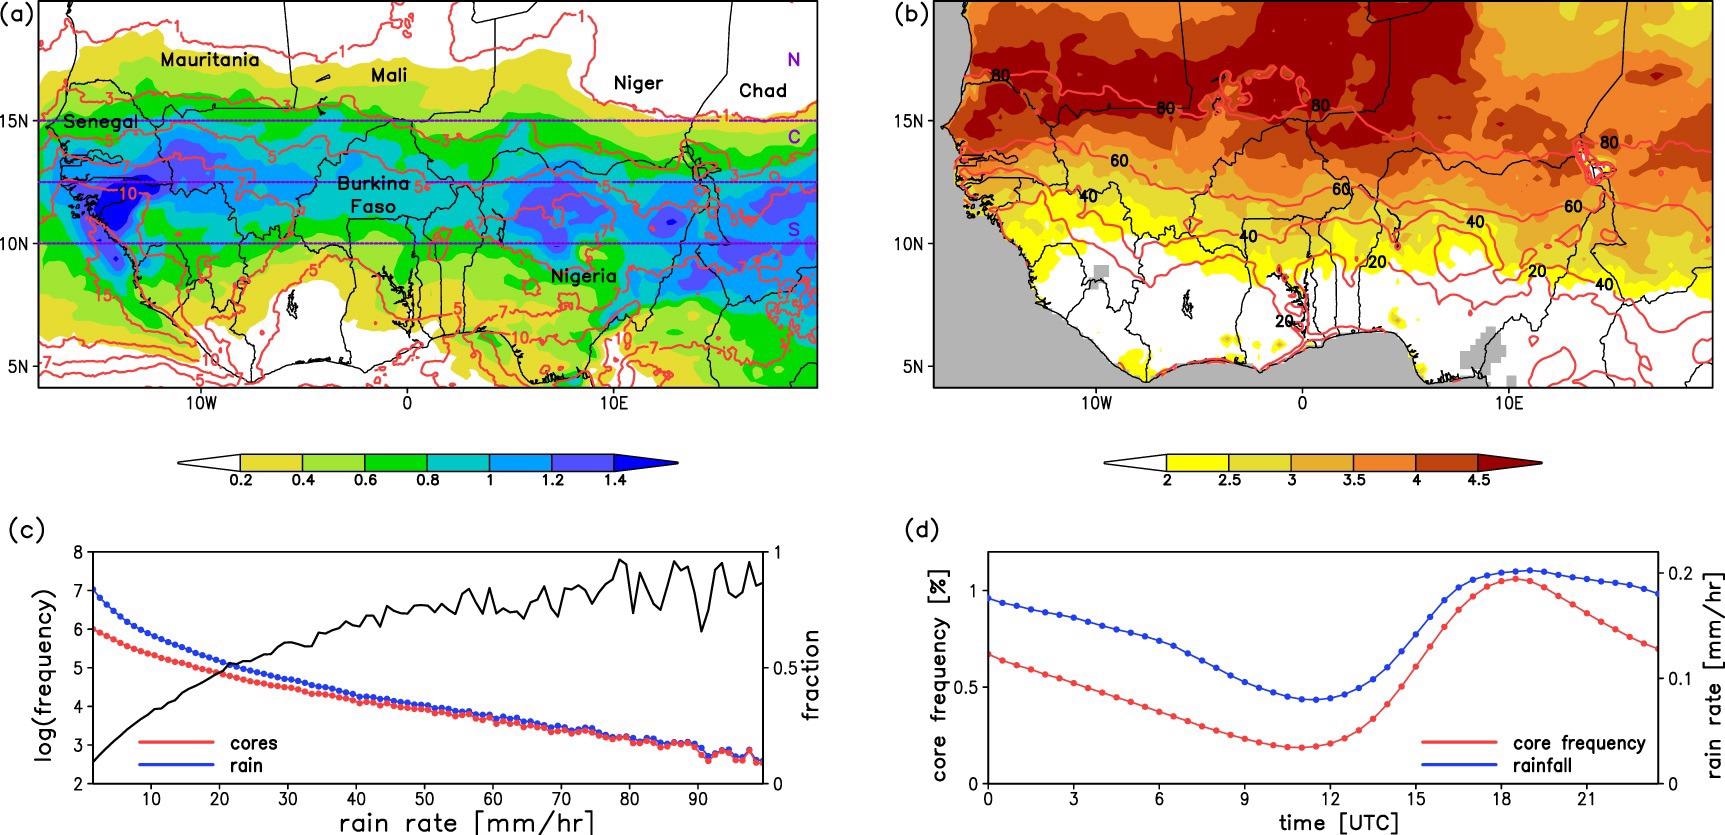 (a) Mean core frequency (shading; %) and rainfall (red contours; mm d-1) across West Africa. Horizontal dashed lines denote the boundaries of the Southern (‘S’), Central (‘C’), and Northern (‘N’) Sahel. (b) The standard deviation of LSTA (shading; K) and a fraction of days with valid data (contours; %). (c) Frequency of cores (red) and rain rate (blue) as a function of rain rate. The black line shows the fraction of rainfall within convective cores, amounting to 0.69 for rain rates of 30 mm h-1 or more. (d) Diurnal cycle of core frequency (red; %) and rain rates (blue; mm h-1). The data in all panels are for the period 2004–2015 and the months June–September.